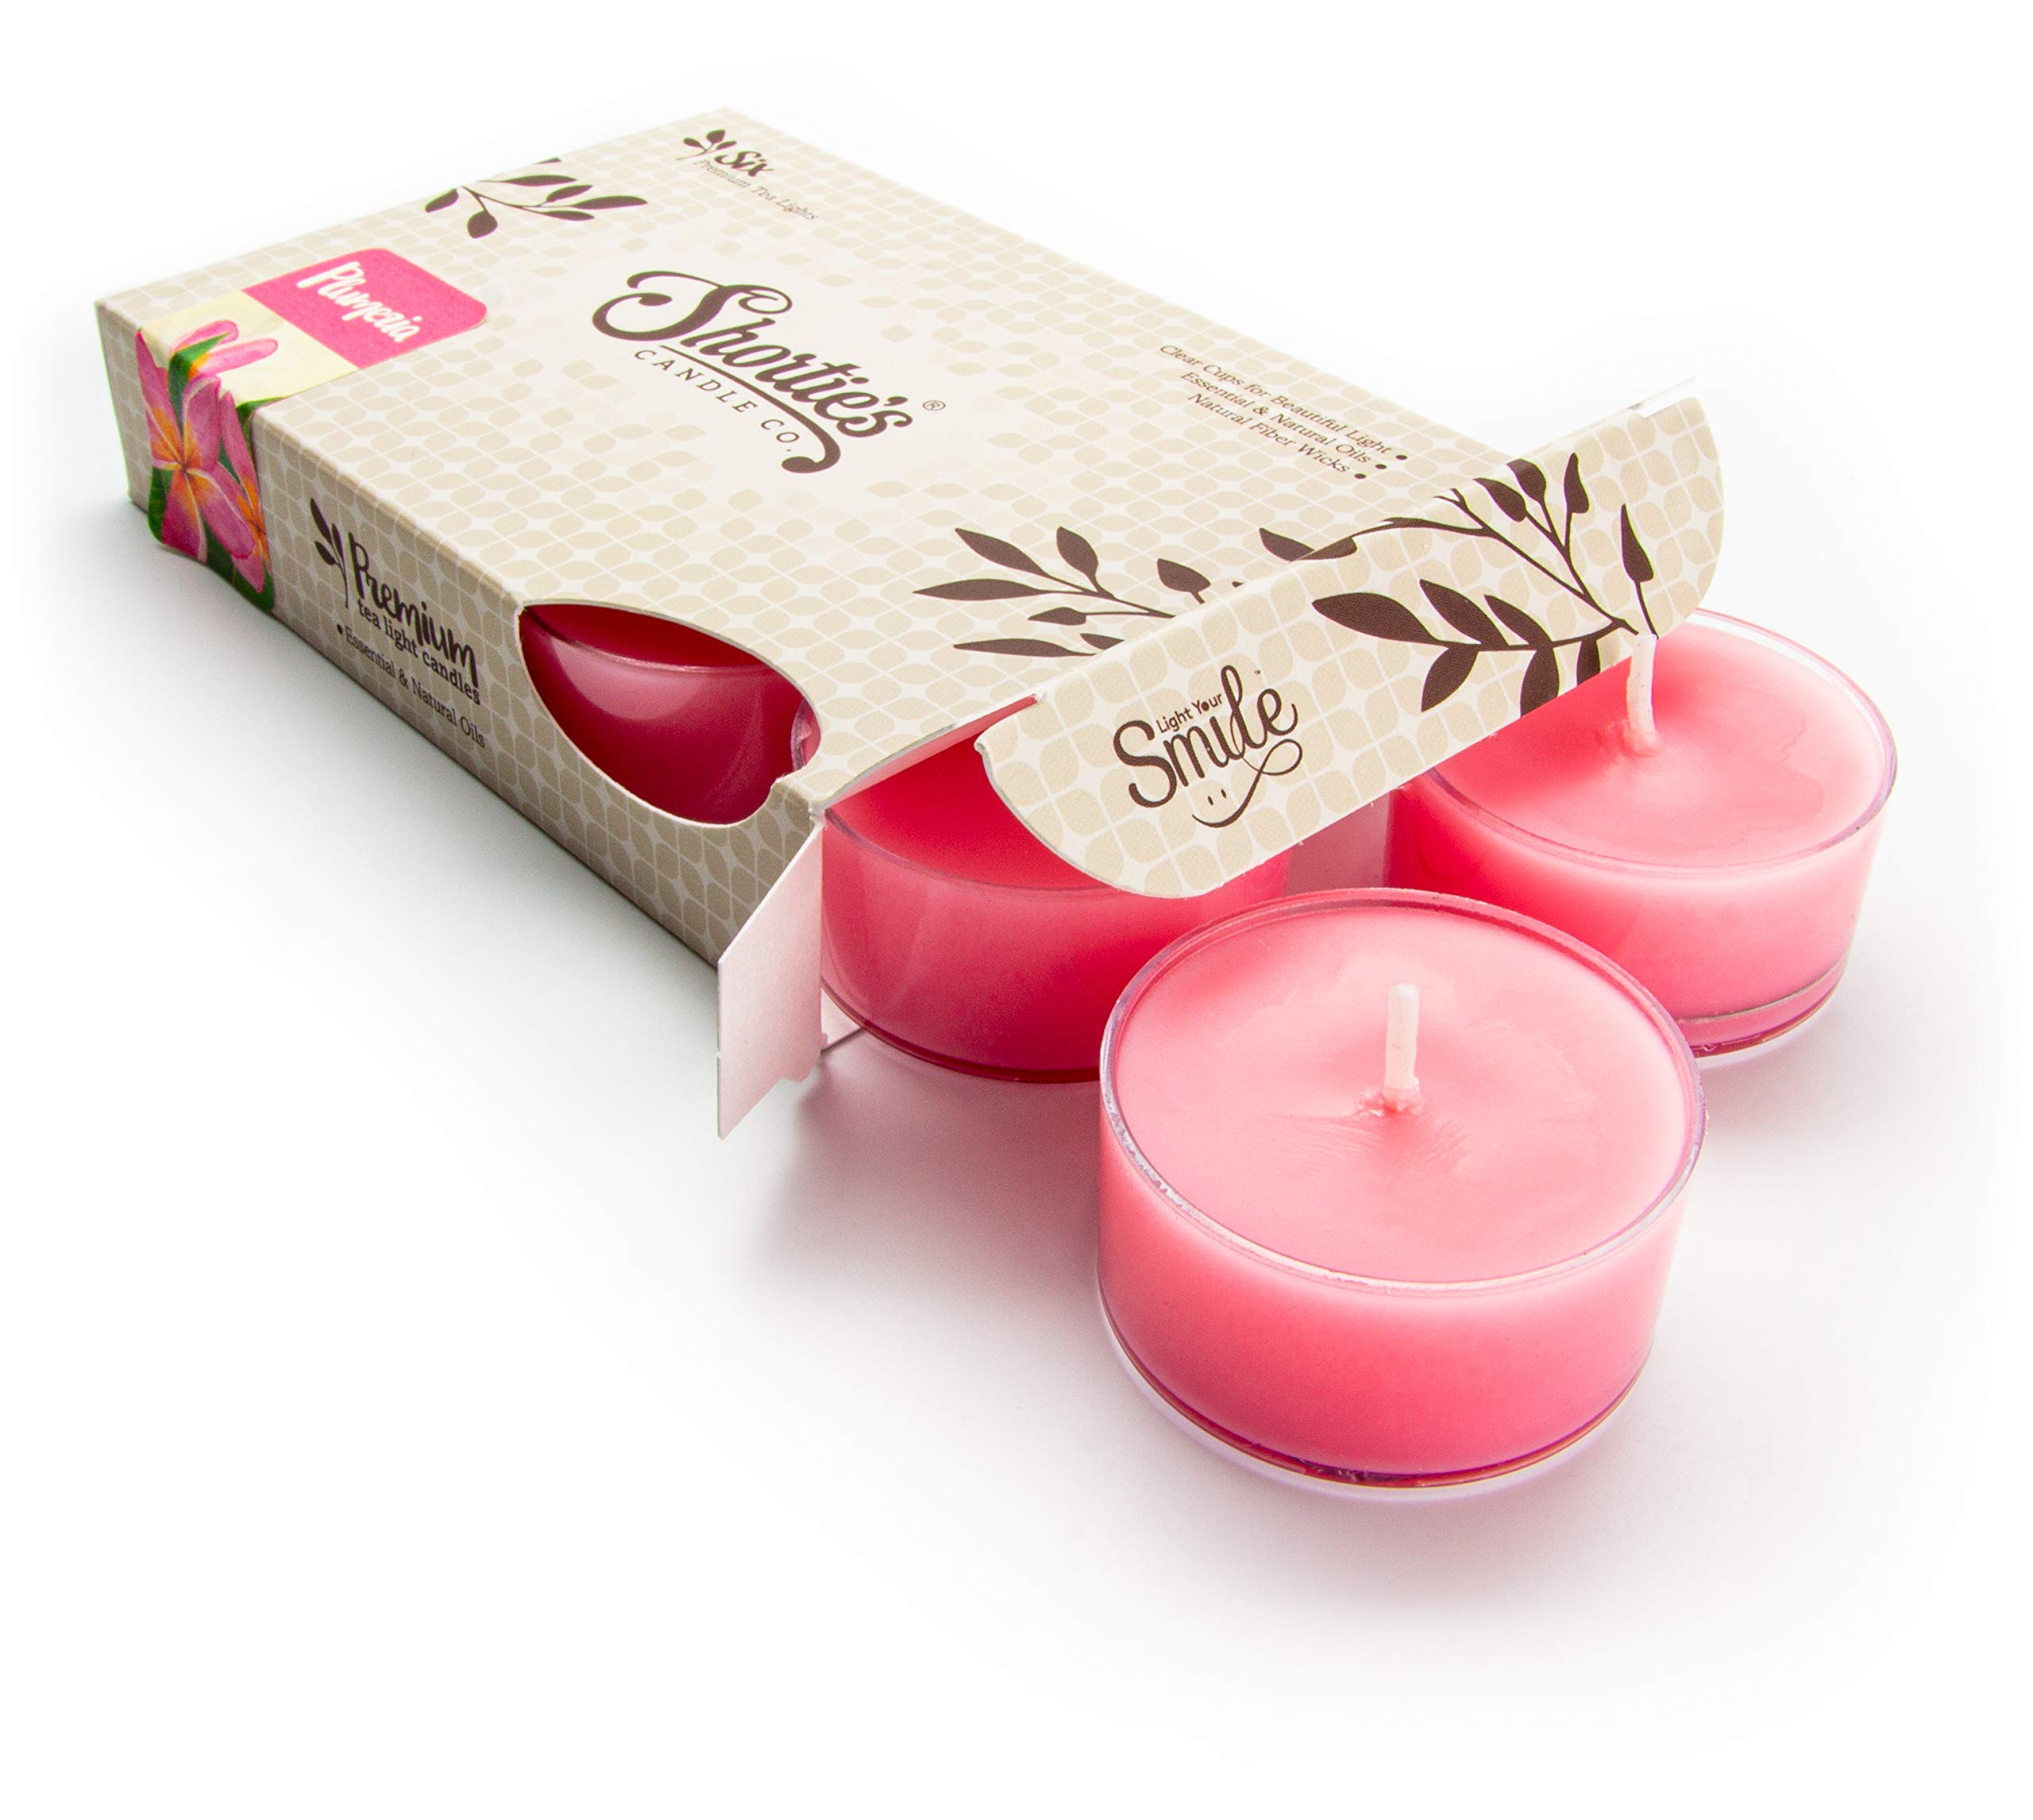 Shortie's Candle Co Pure Plumeria Premium Tealight candles - 6 Pink Highly Scented Tea Lights - Beautiful candlelight - Made in The USA - Flower  Fl